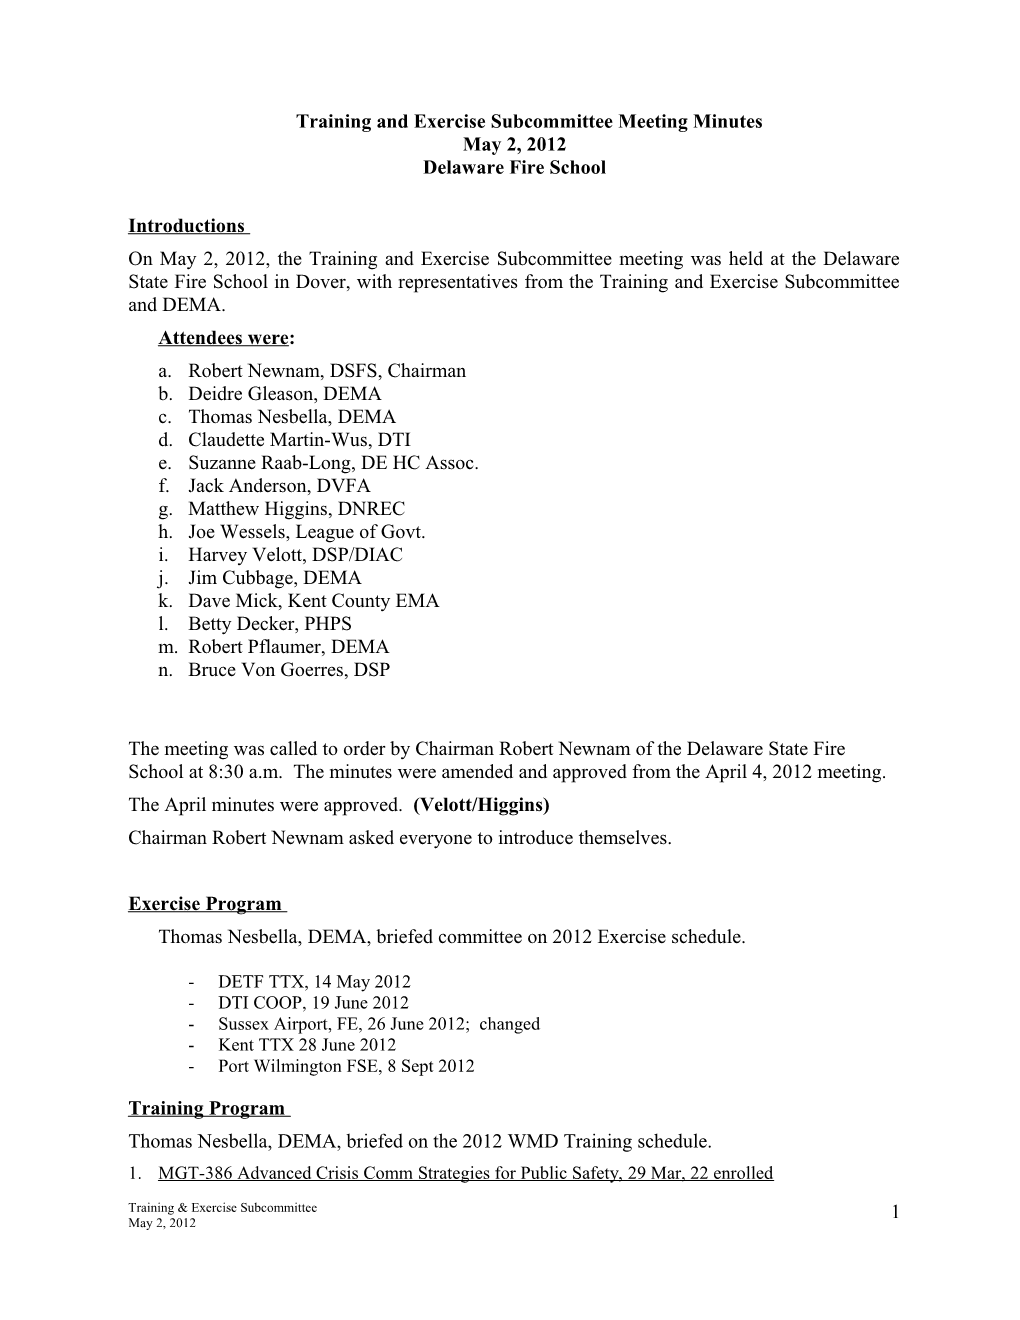 Tentative Agenda for Training and Exercise Subcommittee Meeting